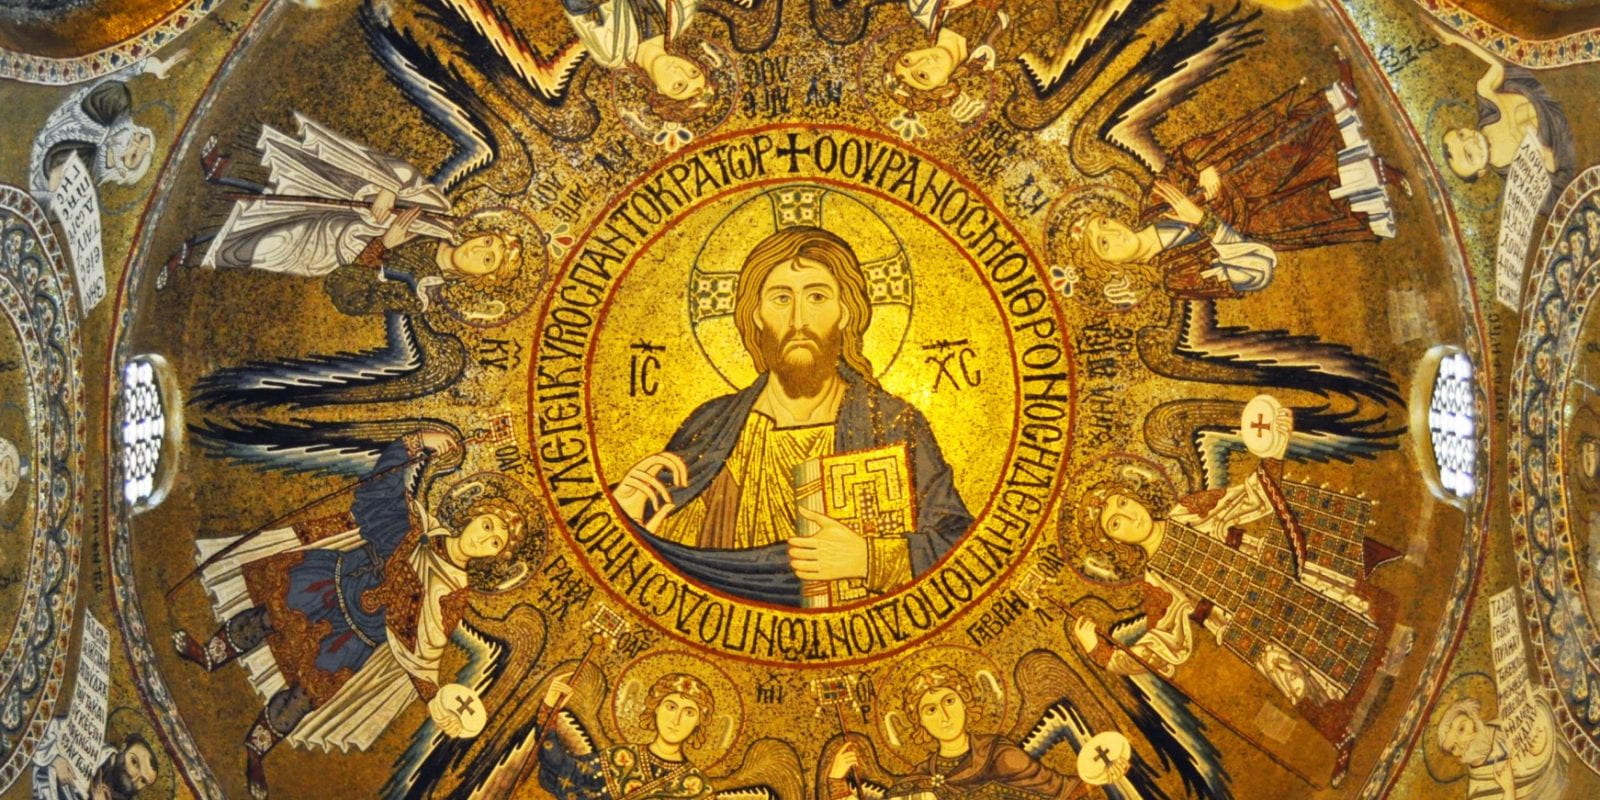 Pantocrator in the dome of the Palatine Chapel, Palermo